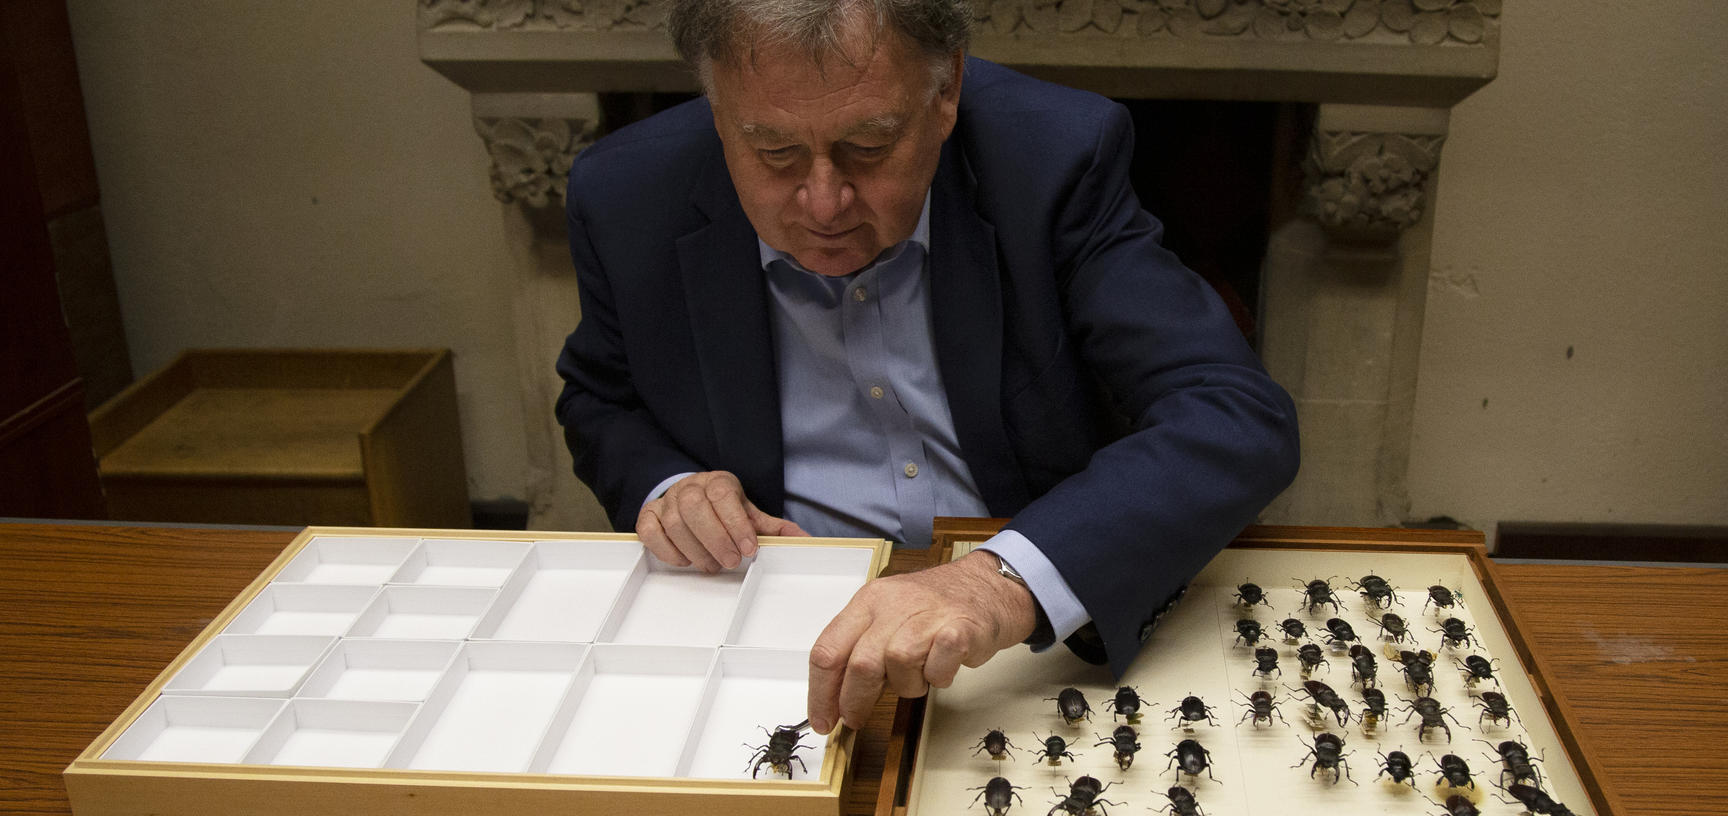 Image of Paul Smith with insects from the OUMNH collection